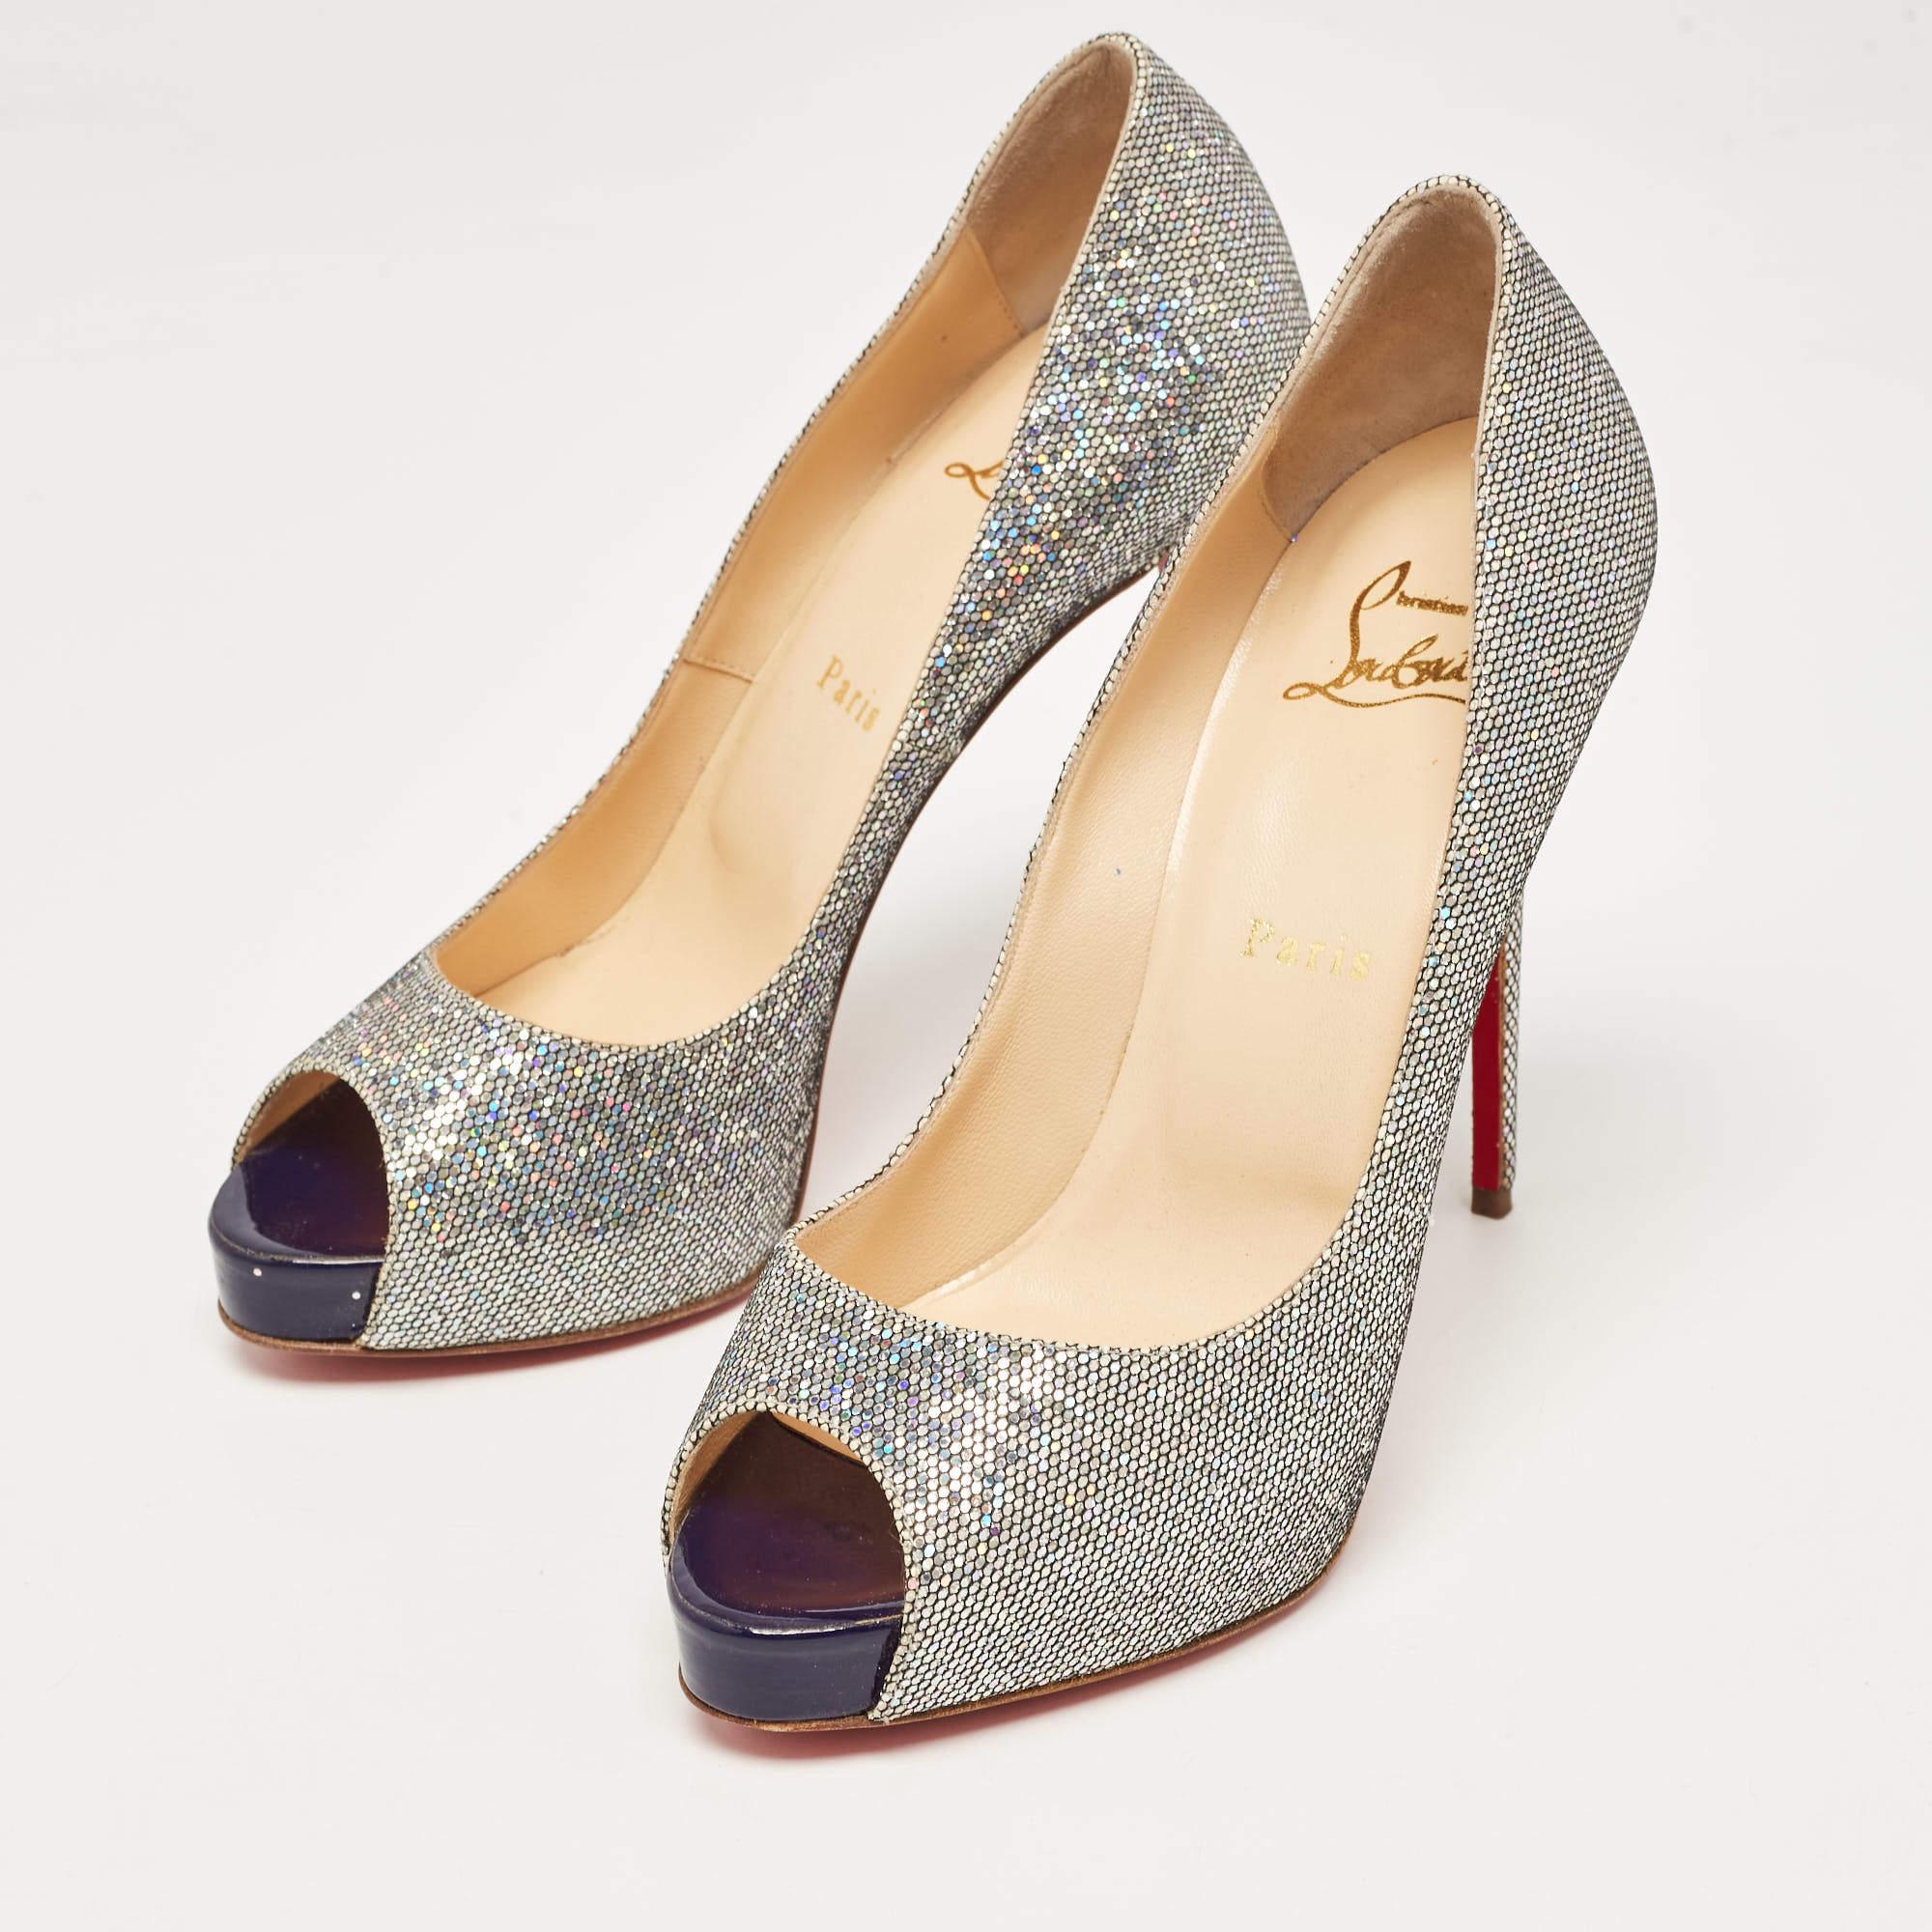 Christian Louboutin Metallic Glitter Fabric Disco Ball New Very Prive Pumps Size For Sale 3